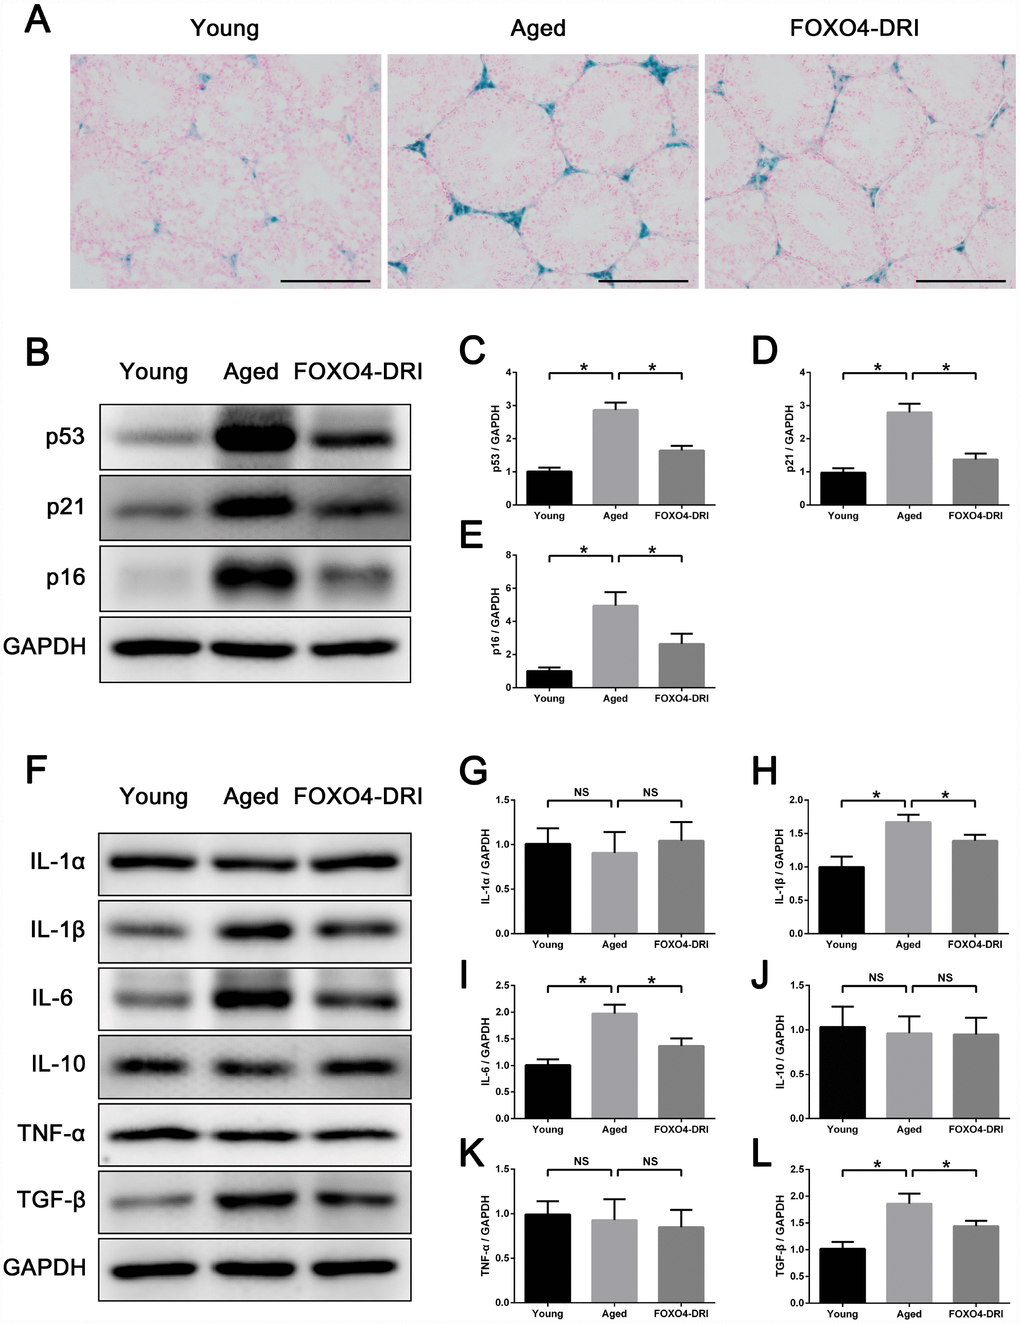 FOXO4-DRI improves the testicular microenvironment in naturally aged mice. (A) SA-β-gal assay showing that FOXO4-DRI treatment decreases SA-β-gal activity in the testicular interstitium in aged mice. Scale bar: 200 μm. (B–E) Western blots revealing FOXO4-DRI decreases levels of the senescence-associated proteins p53, p21 and p16 in testes of aged mice. (F–L) Western blots revealing that FOXO4-DRI decreases levels of the SASP factors IL-1β, IL-6 and TGF-β in testes of aged mice, but has no effect on testicular levels of IL-1α, IL-10 and TNF-α. Data depict the mean ± SD. n=6. *P